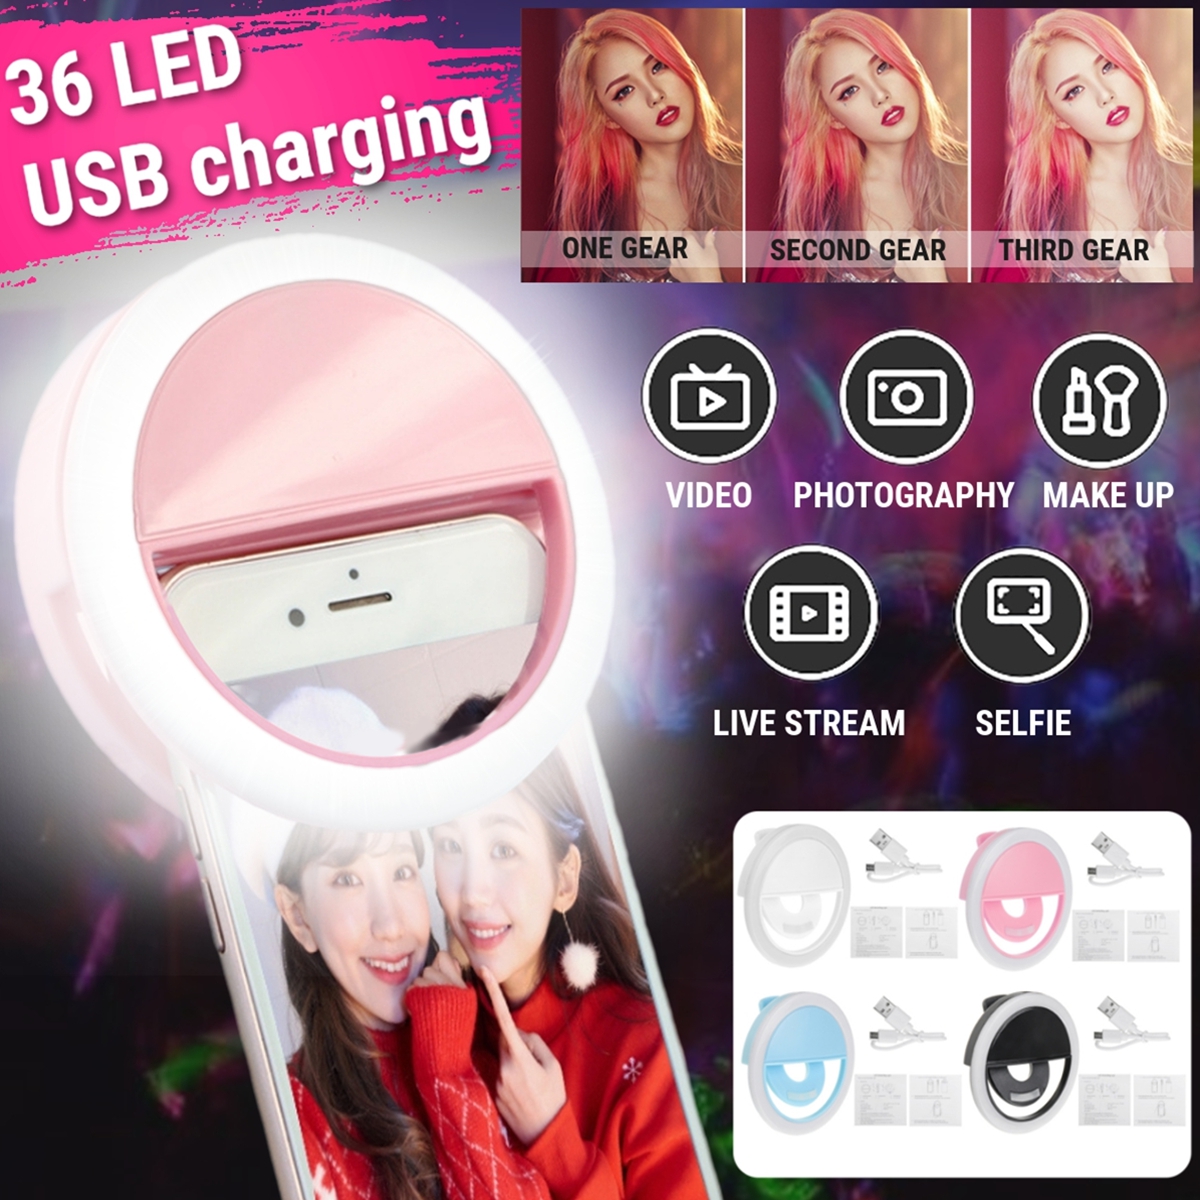 Bakeey-Selfie-36-LEDS-Fill-Lamp-Ring-Light-Universal-Clip-3-levels-Brightness-For-Cell-Phone-1715111-2